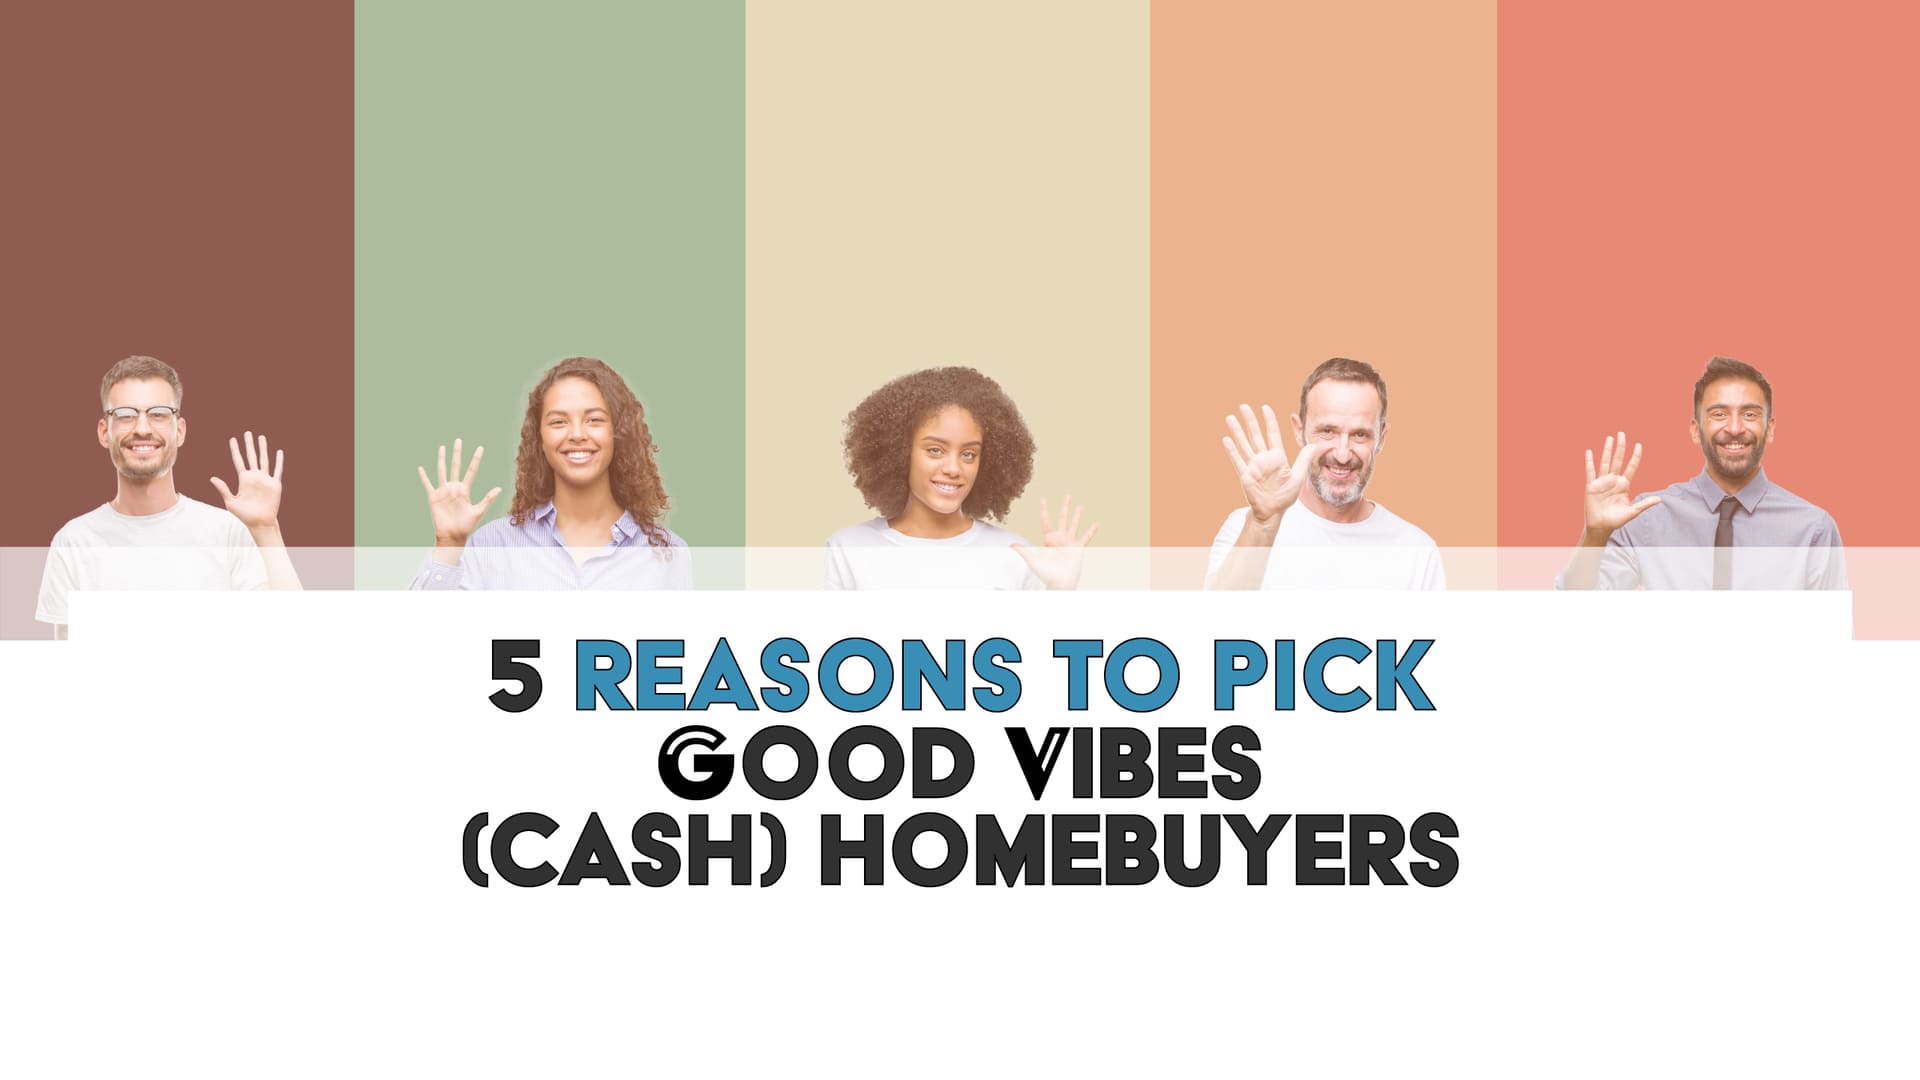 5 Reasons To Pick Good Vibes (Cash) Homebuyers